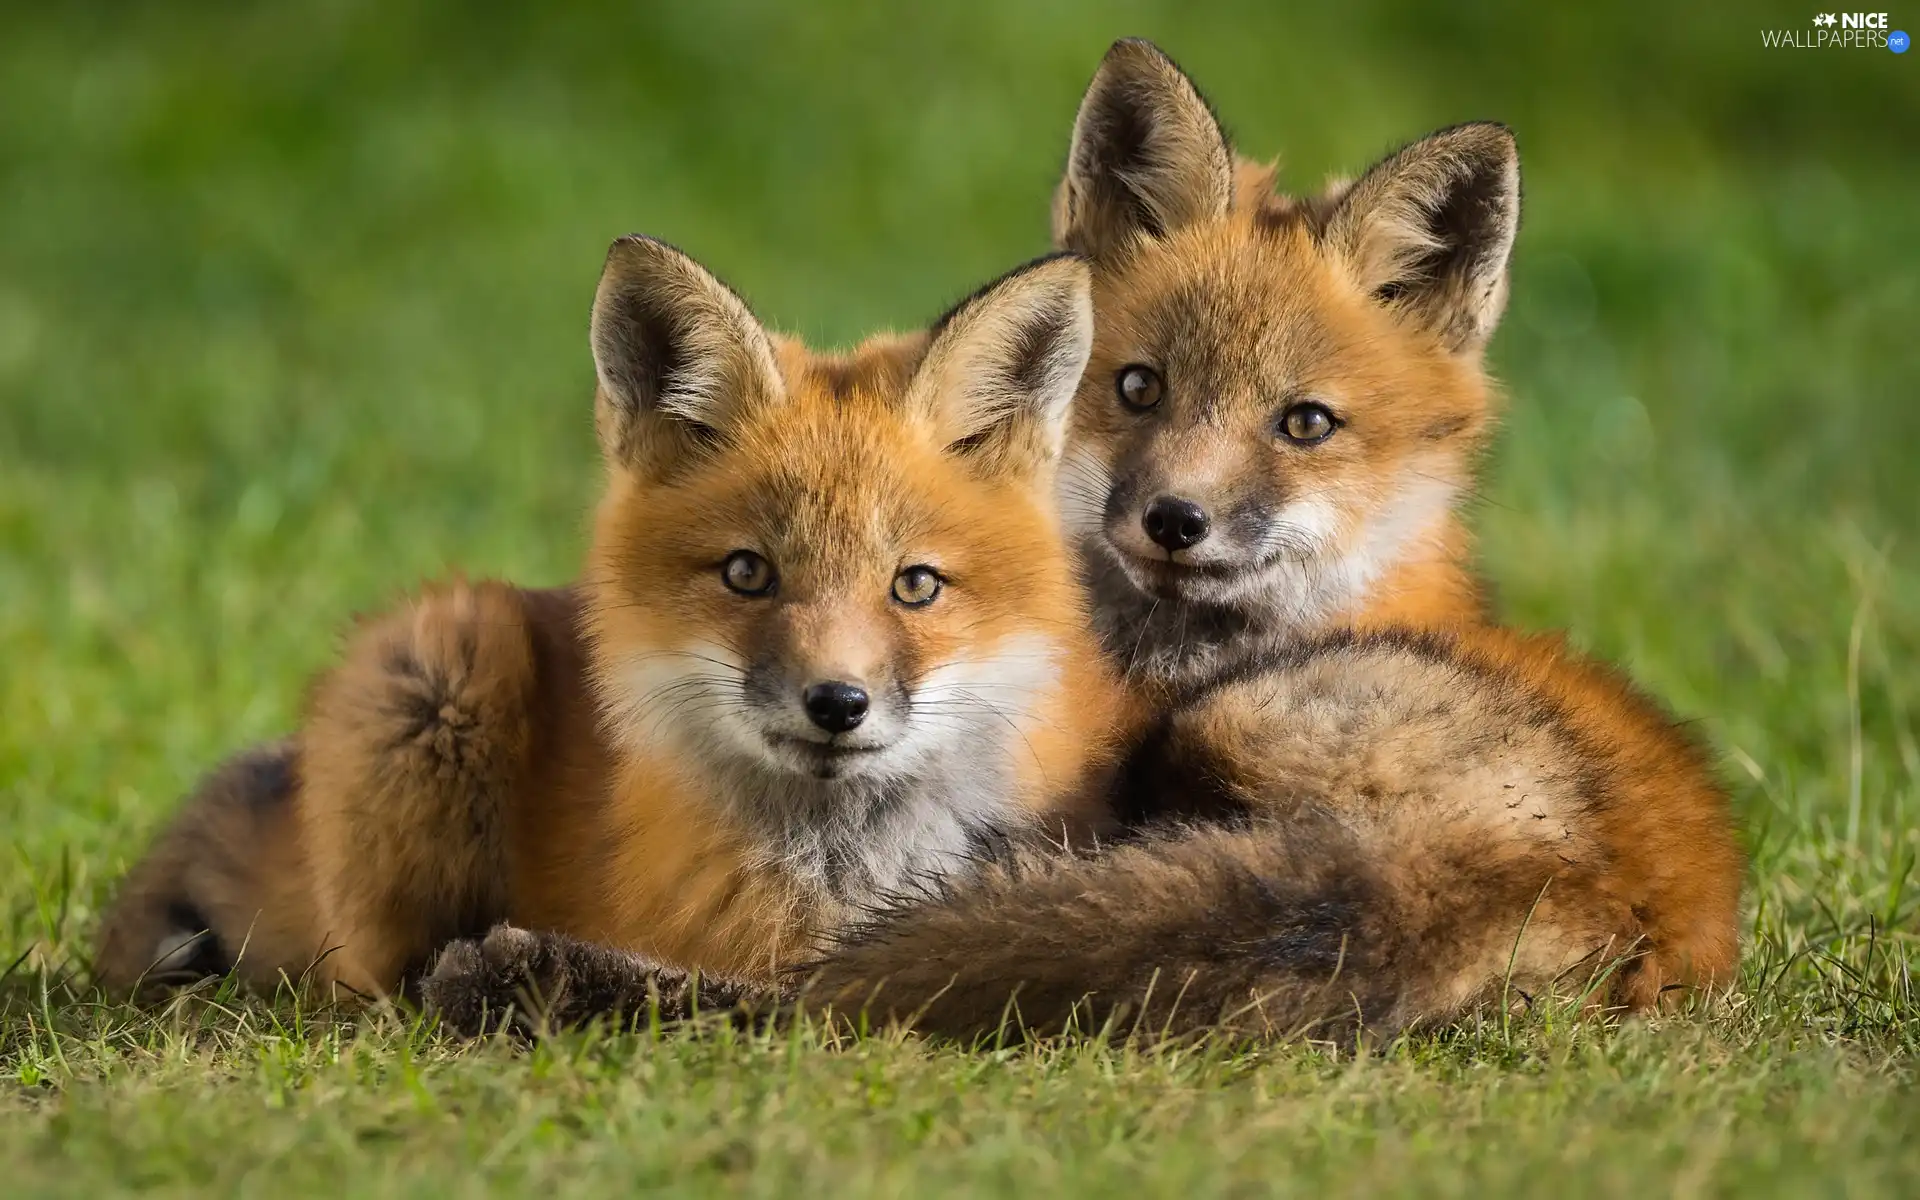 Two cars, fox, grass, young